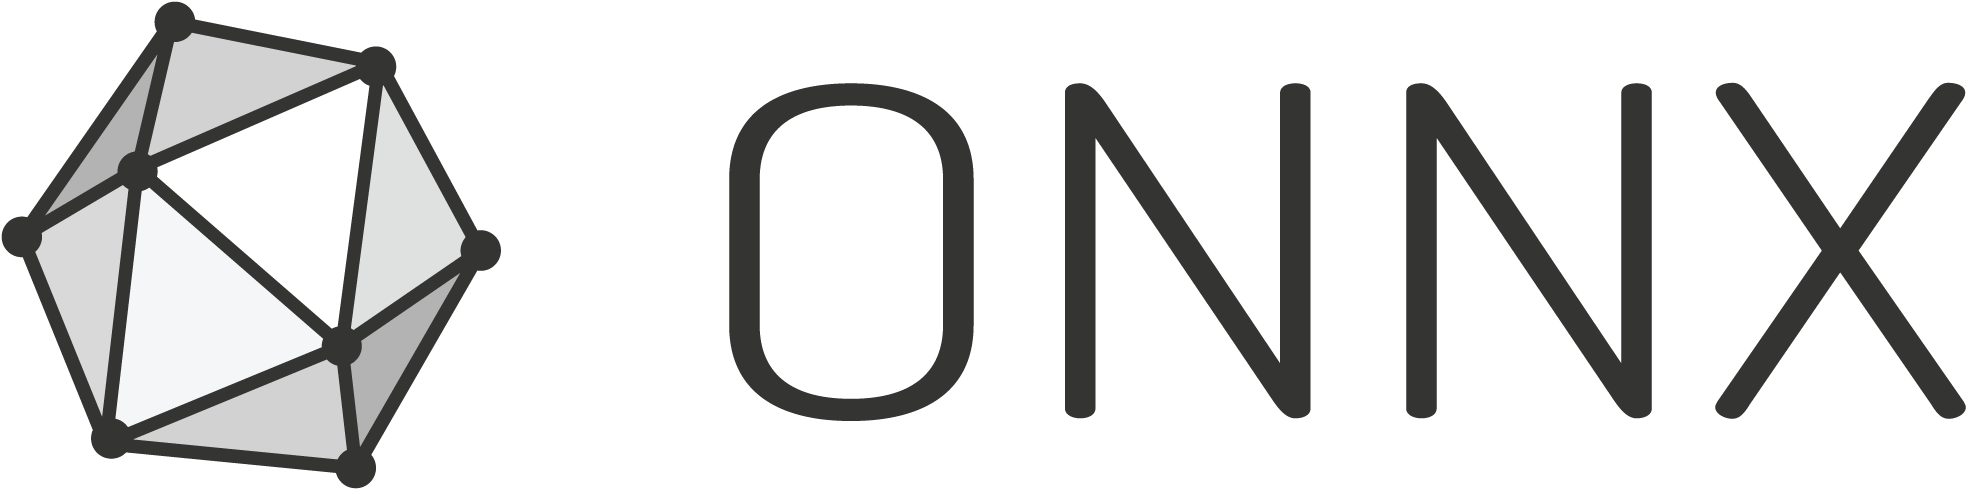 Cntk Is Also One Of The First Deep Learning Toolkits - Onnx Logo (2002x515)